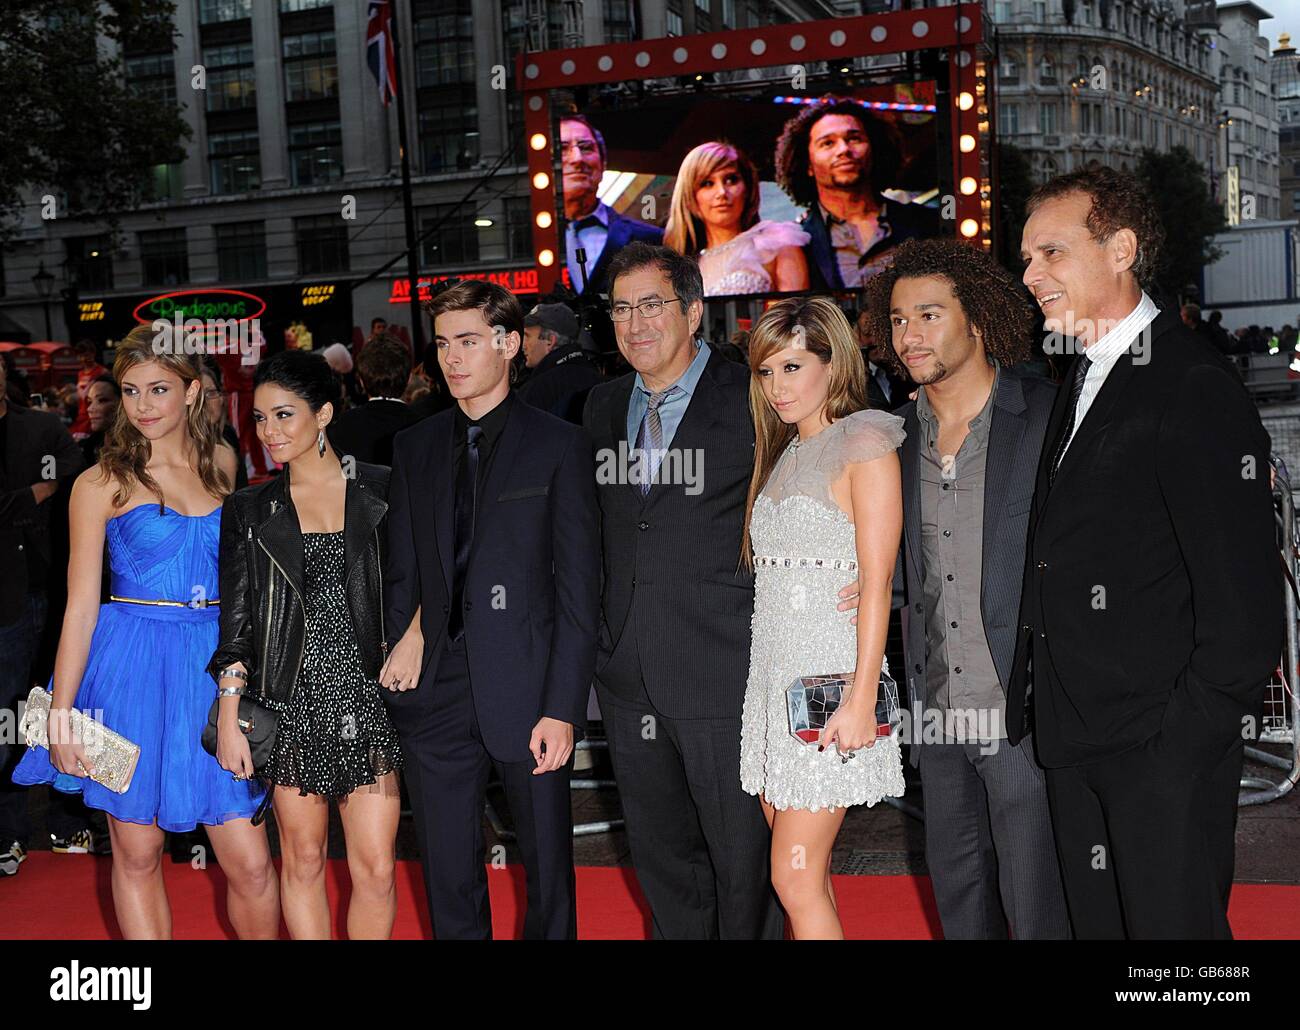 Jemma McKenzie-Brown, Vanessa Hudgens, Director Kenny Ortega, Zac Efron, Ashley Tisdale, Corbin Bleu and unknown guest arrives for the UK premiere of 'High School Musical 3' at the Empire Leicester Square, London, WC2 Stock Photo